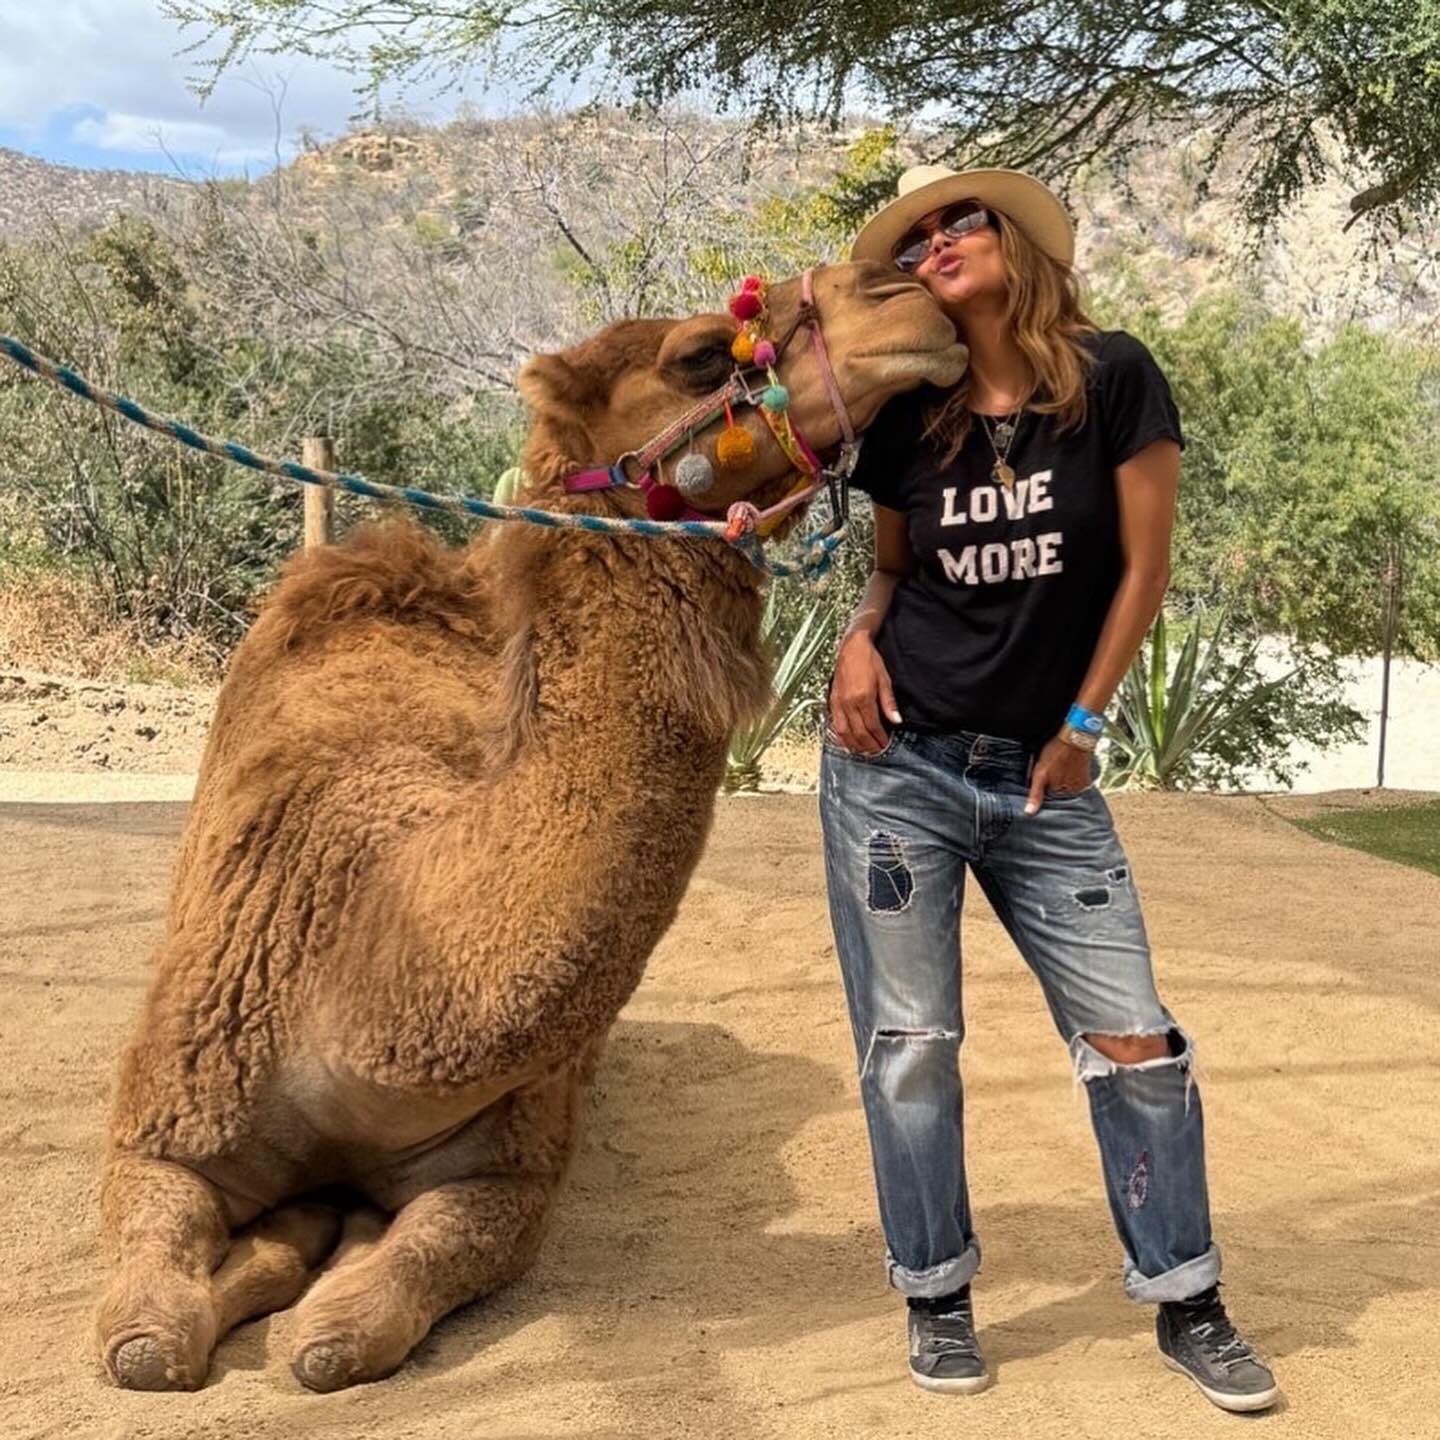 Halle got to meet and kiss a camel while she was in Mexico